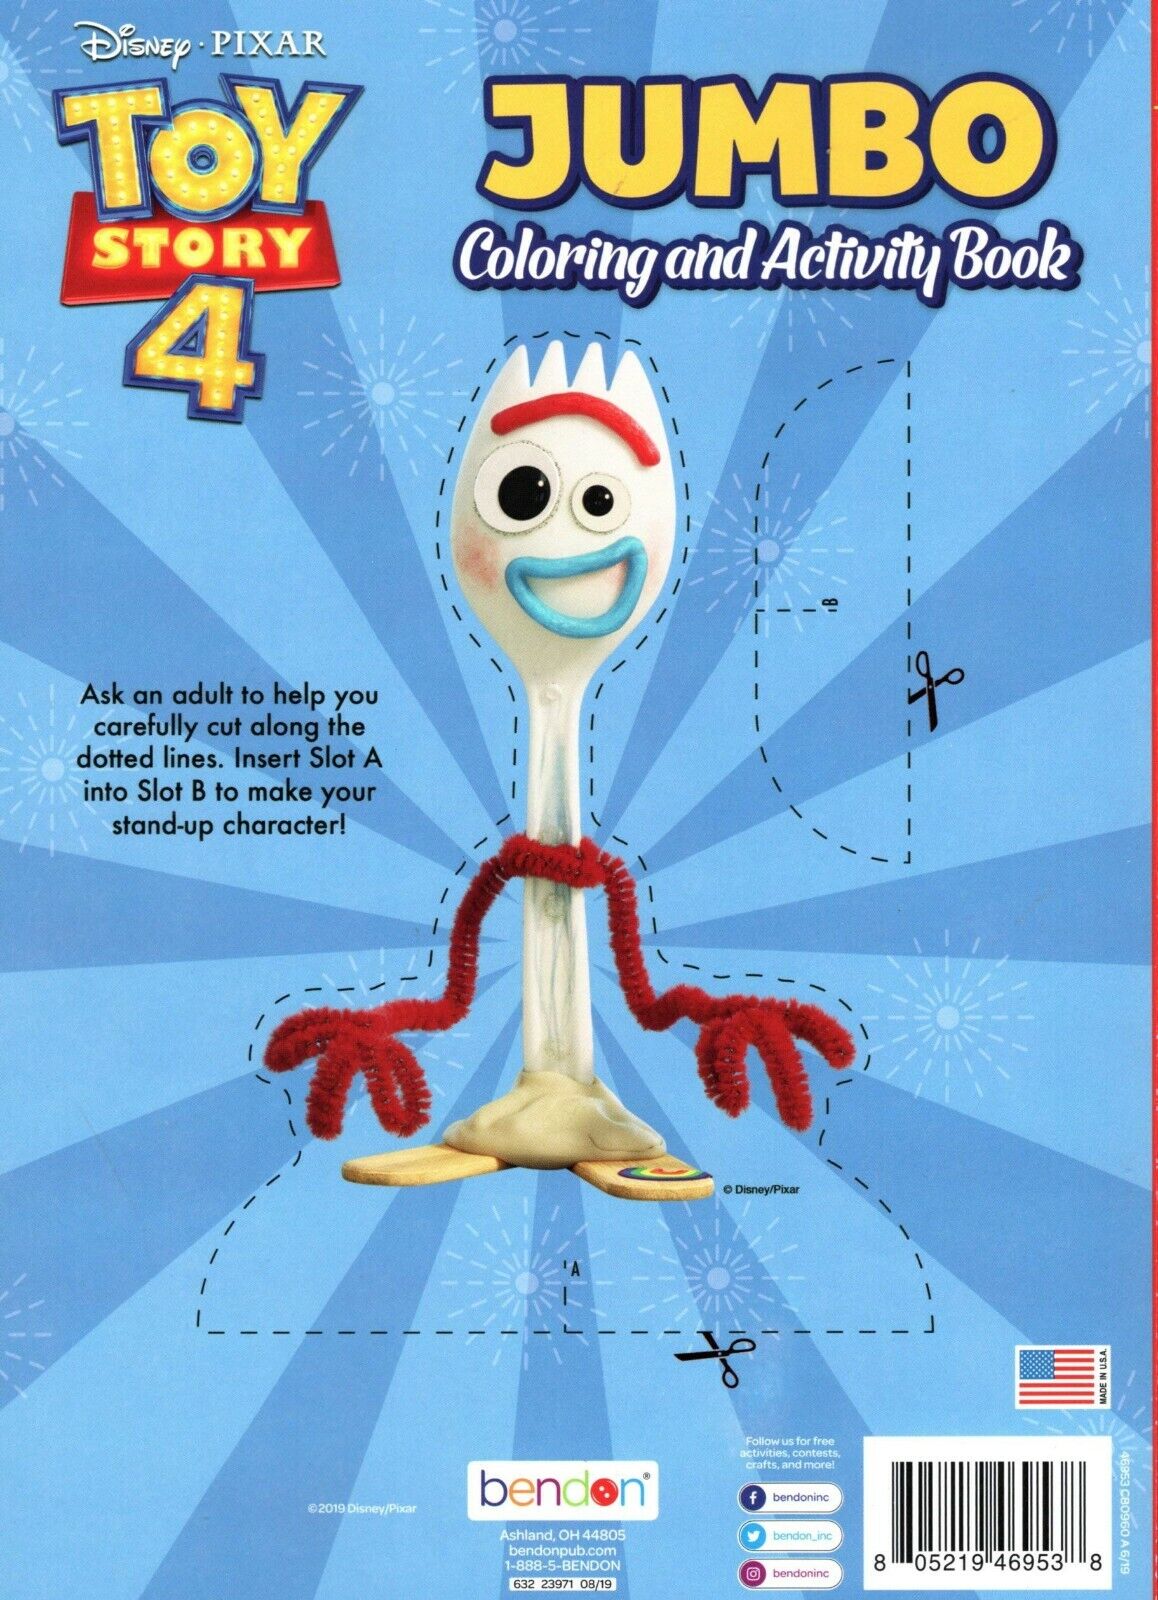 Disney Toy Story 4 - Jumbo Coloring & Activity Book